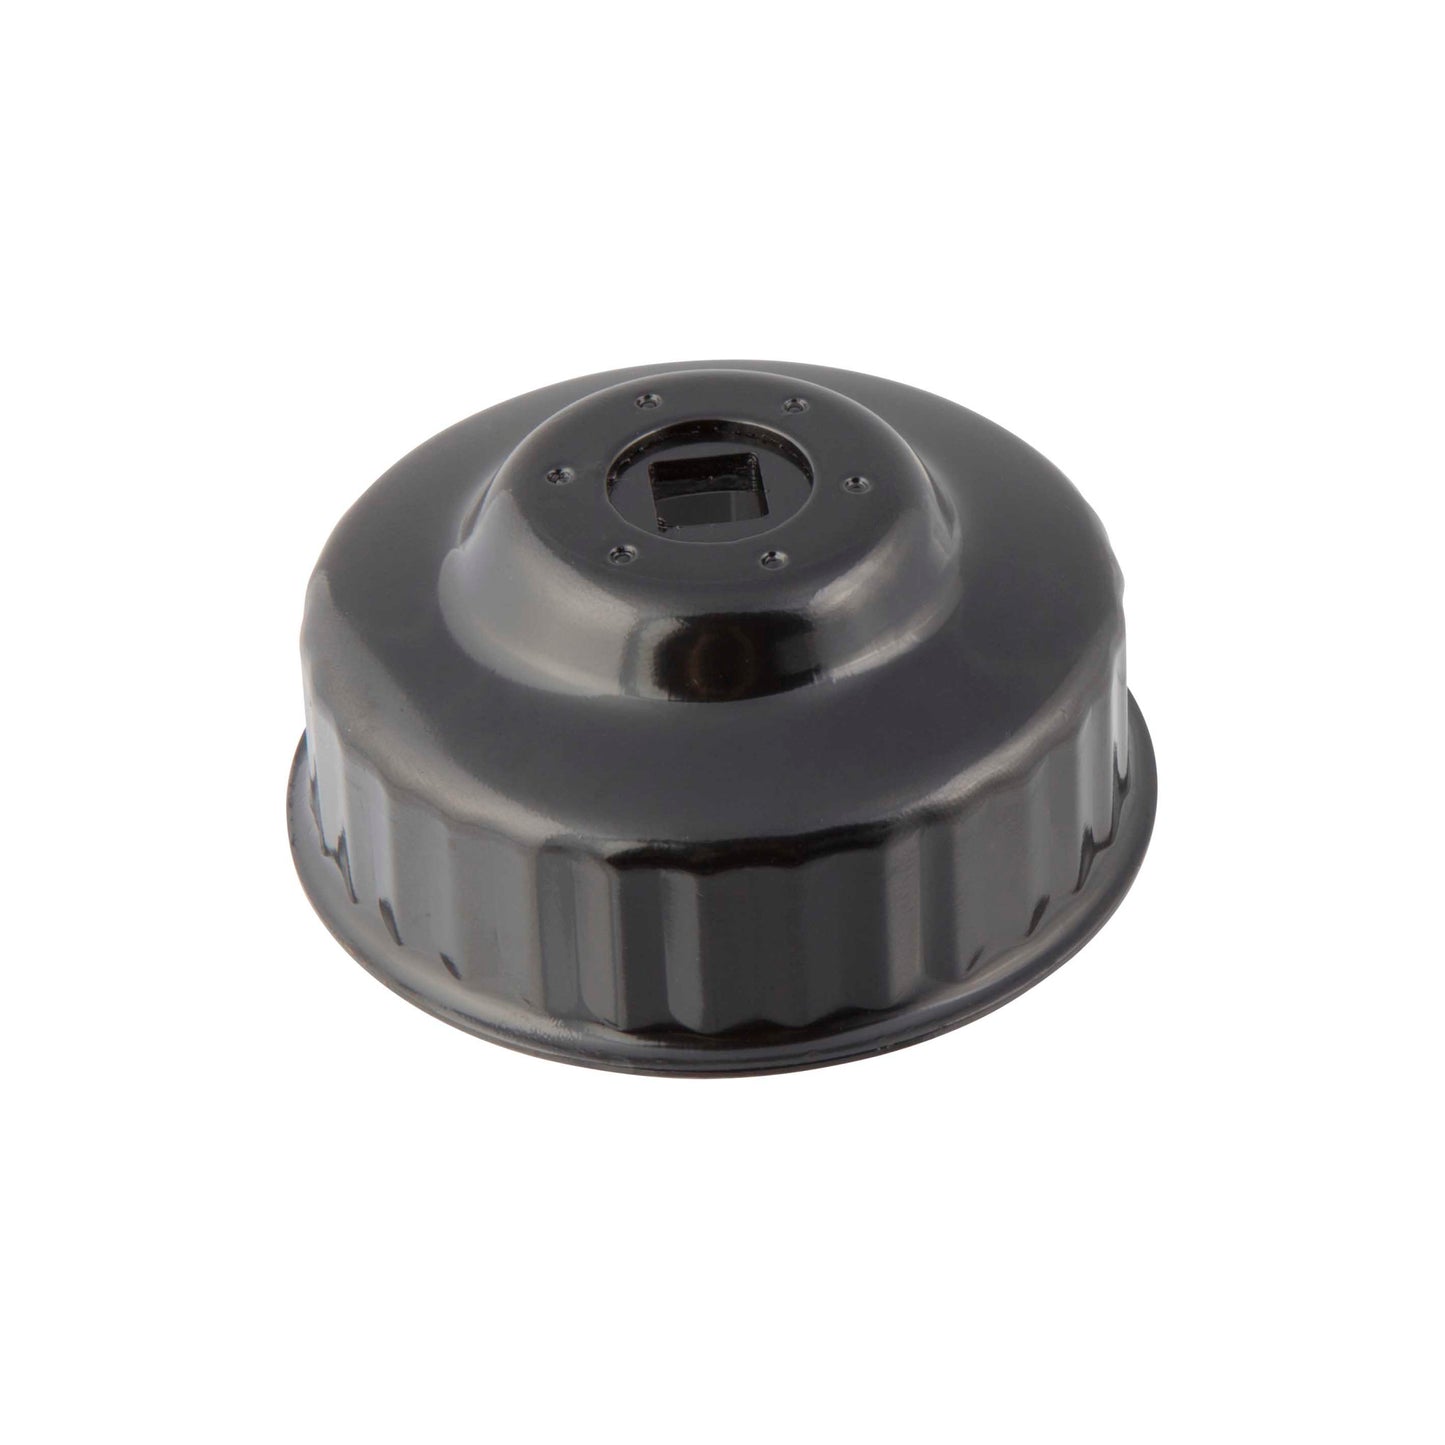 Oil Filter Cap Wrench 76mm x 30 Flute